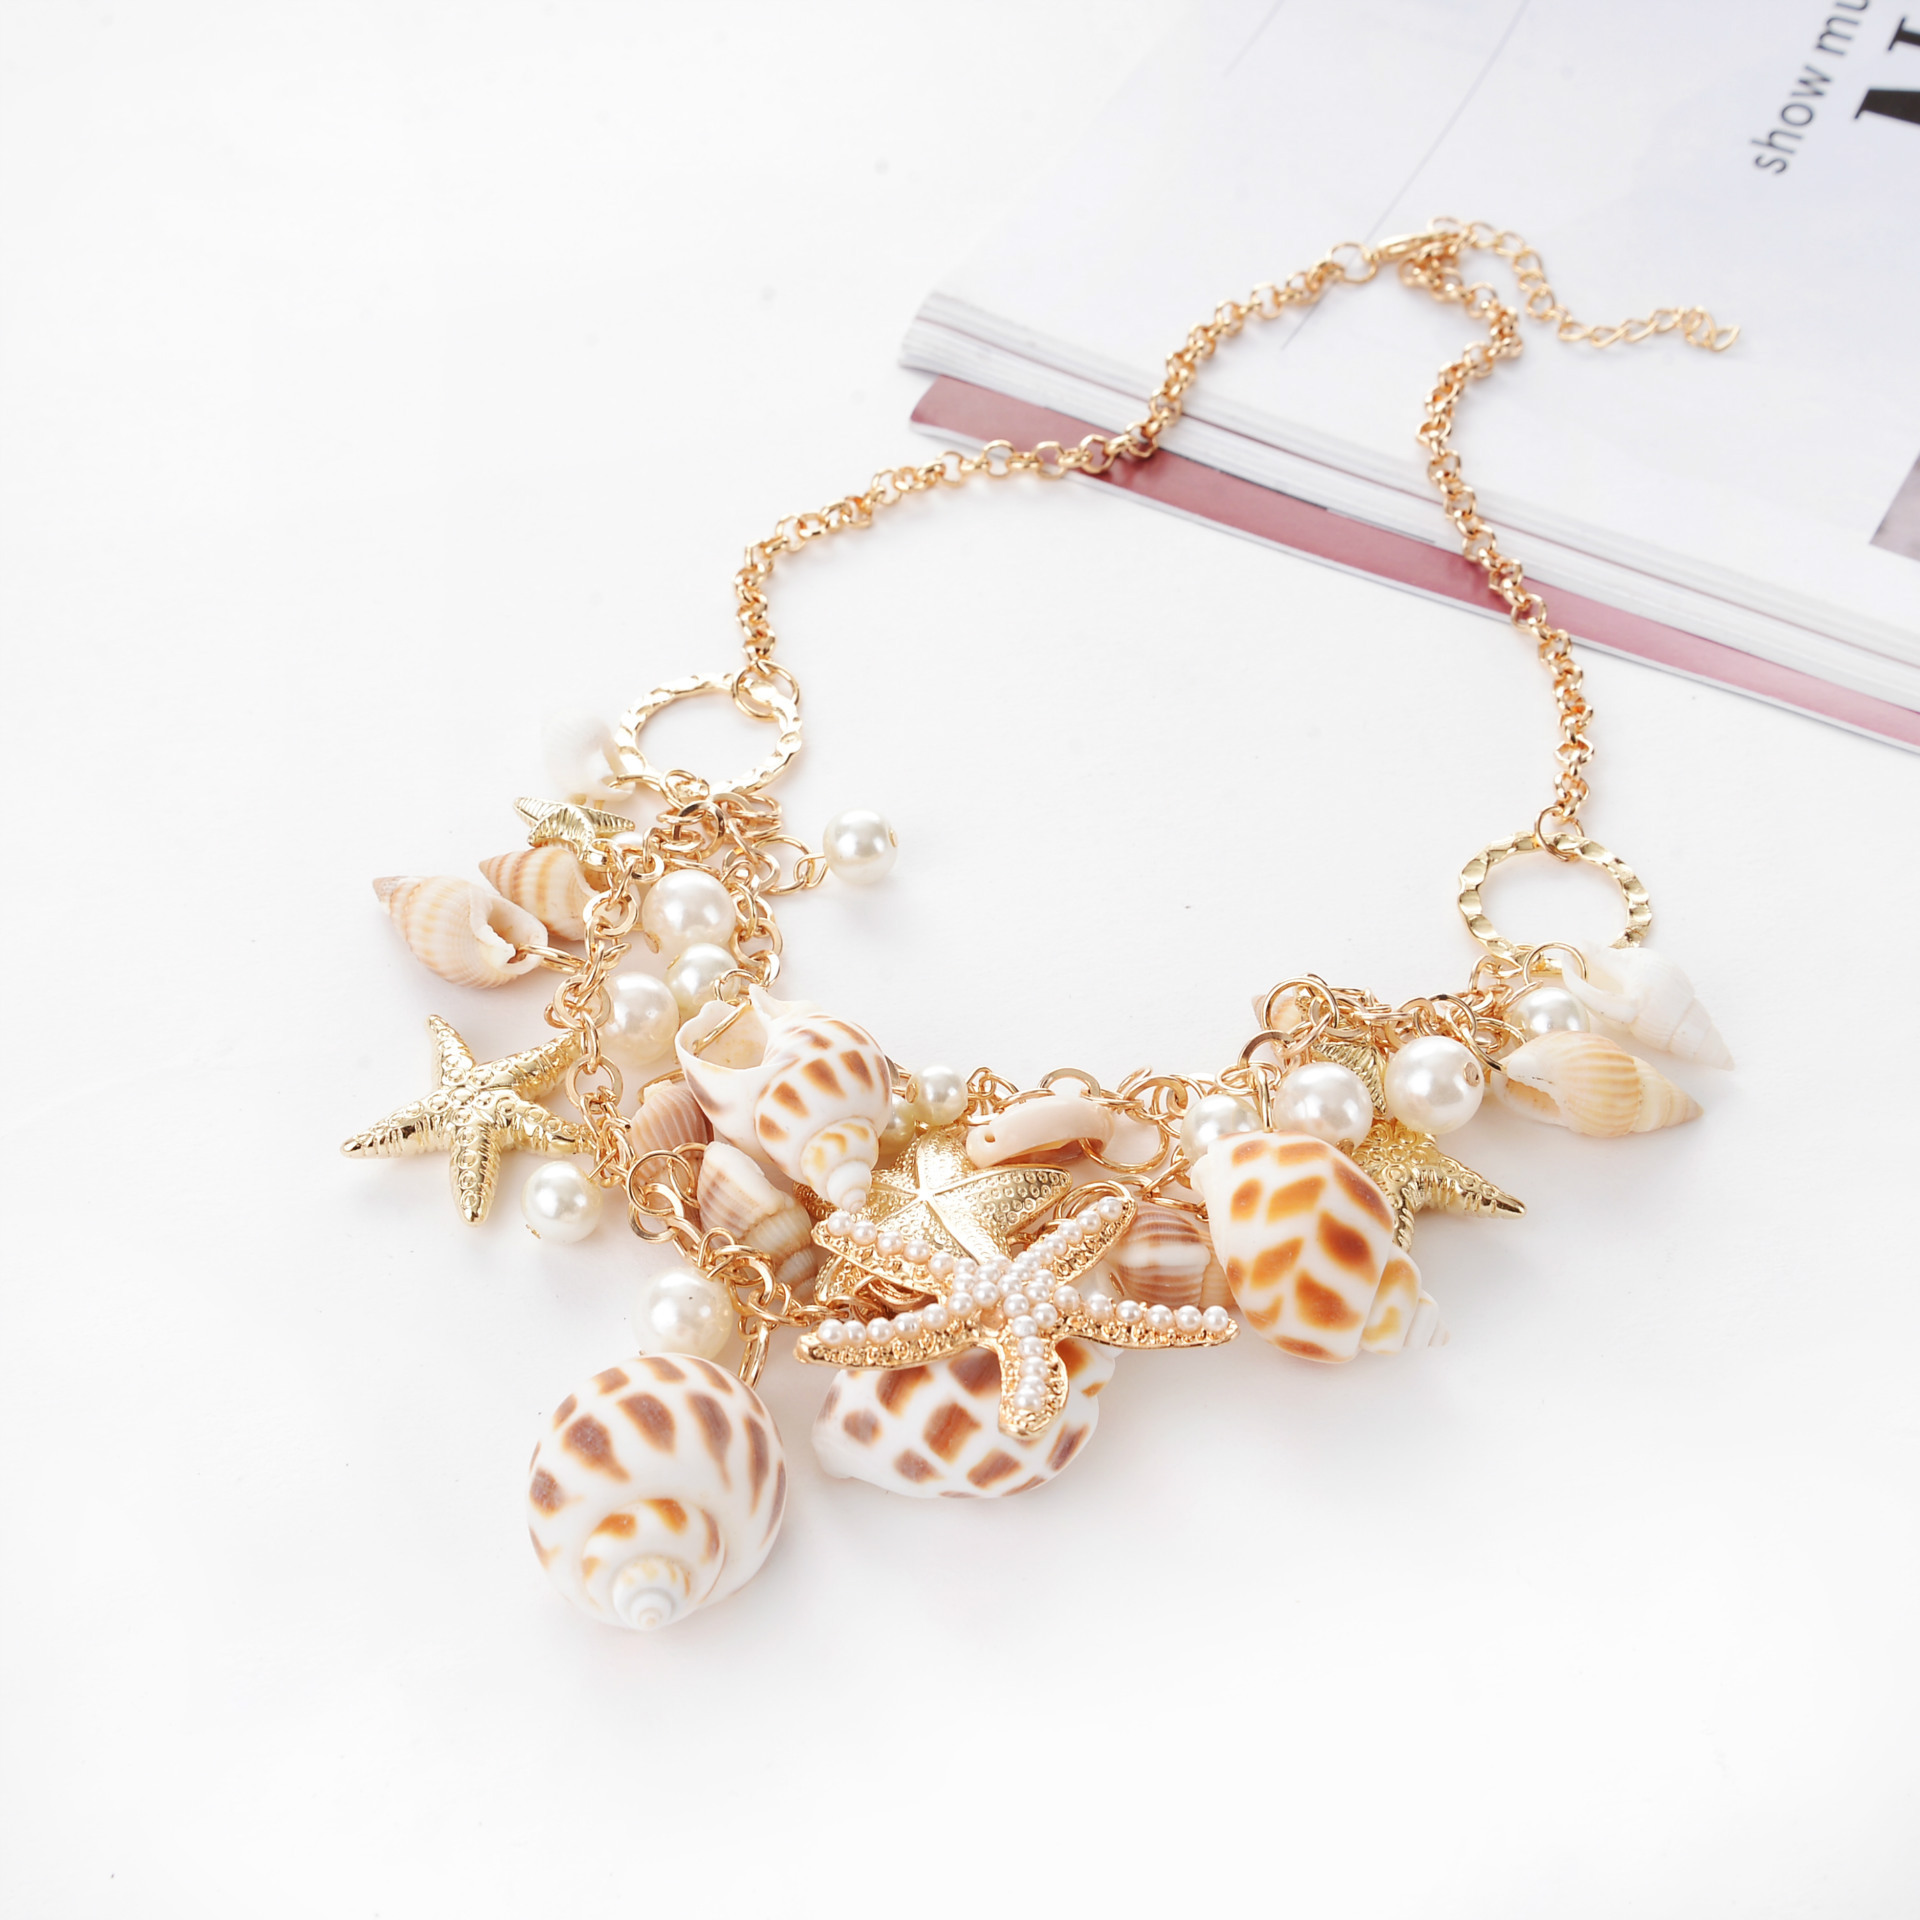 European and American Big Brand Stylish Beach Style Shiny Starfish Necklace European and American Fashion Jewelry Wholesale 9040